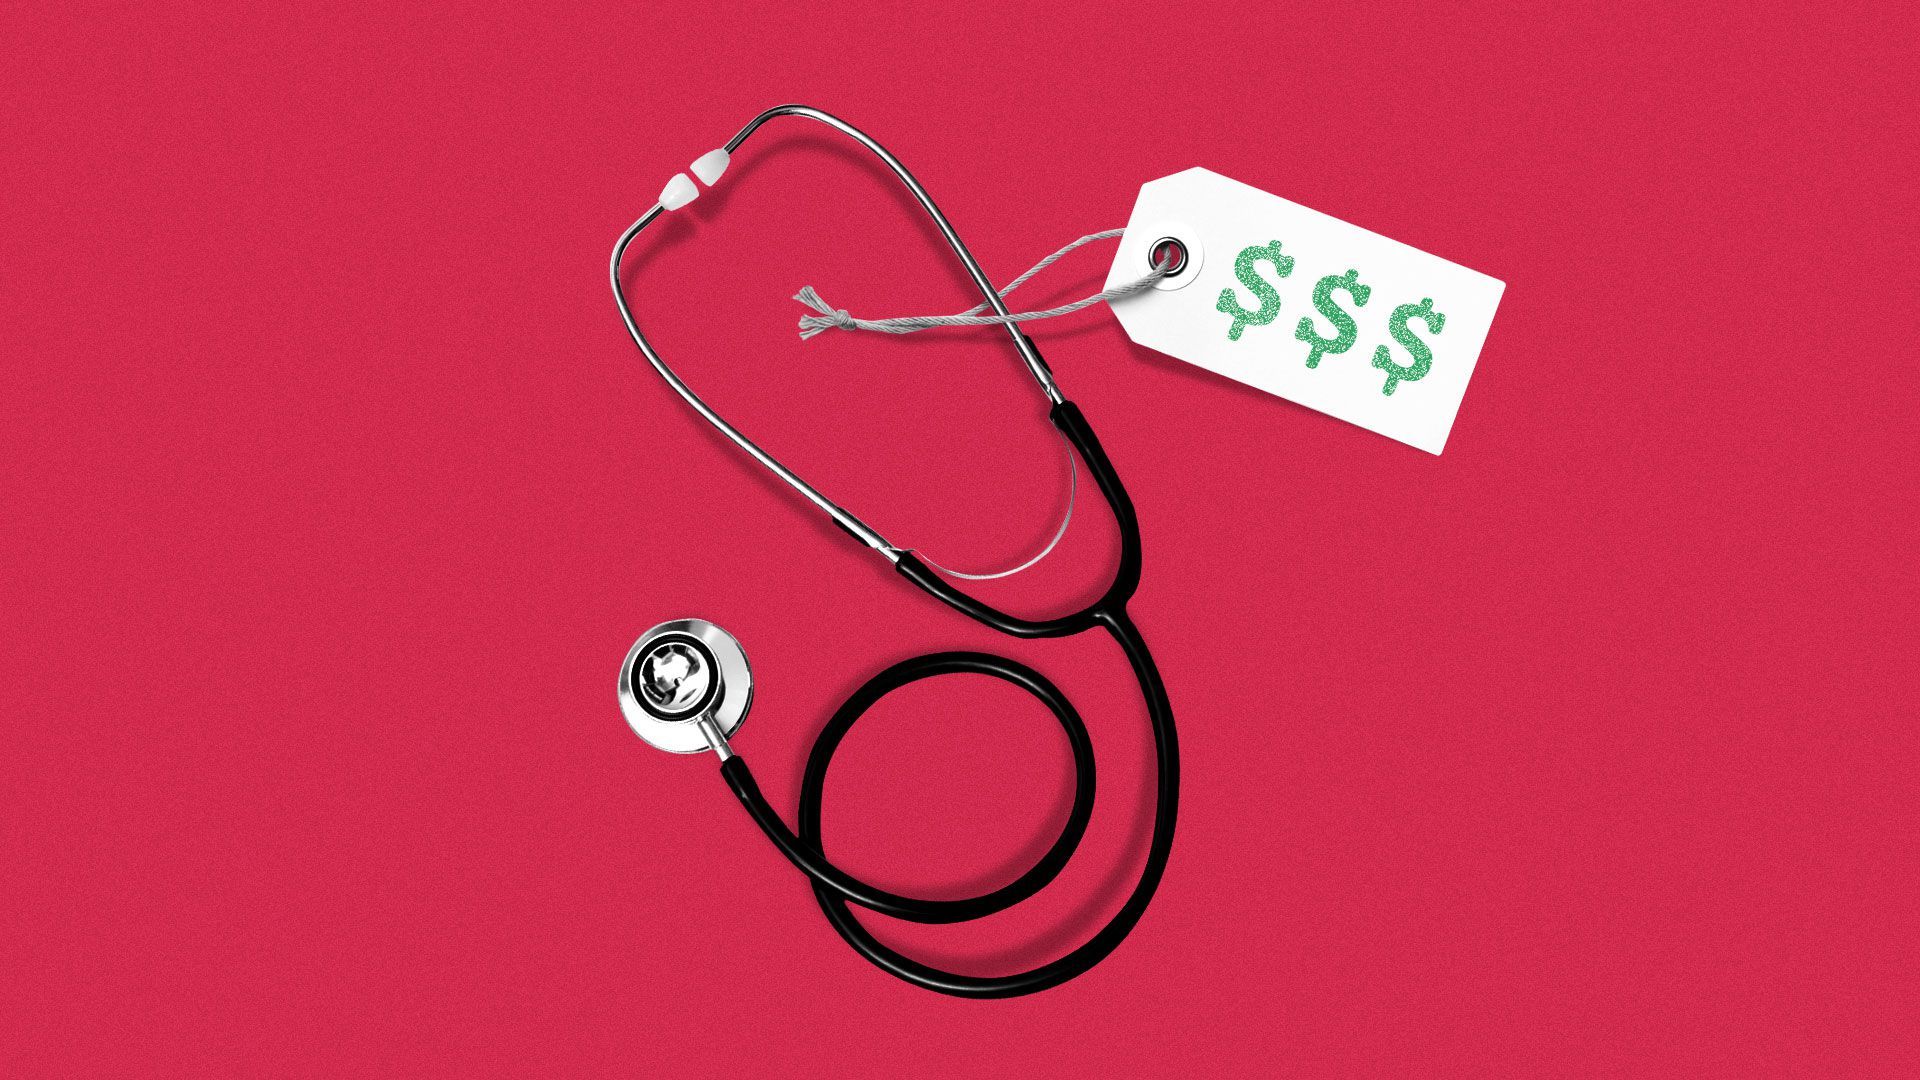 Illustration of a stethoscope with a high price tag